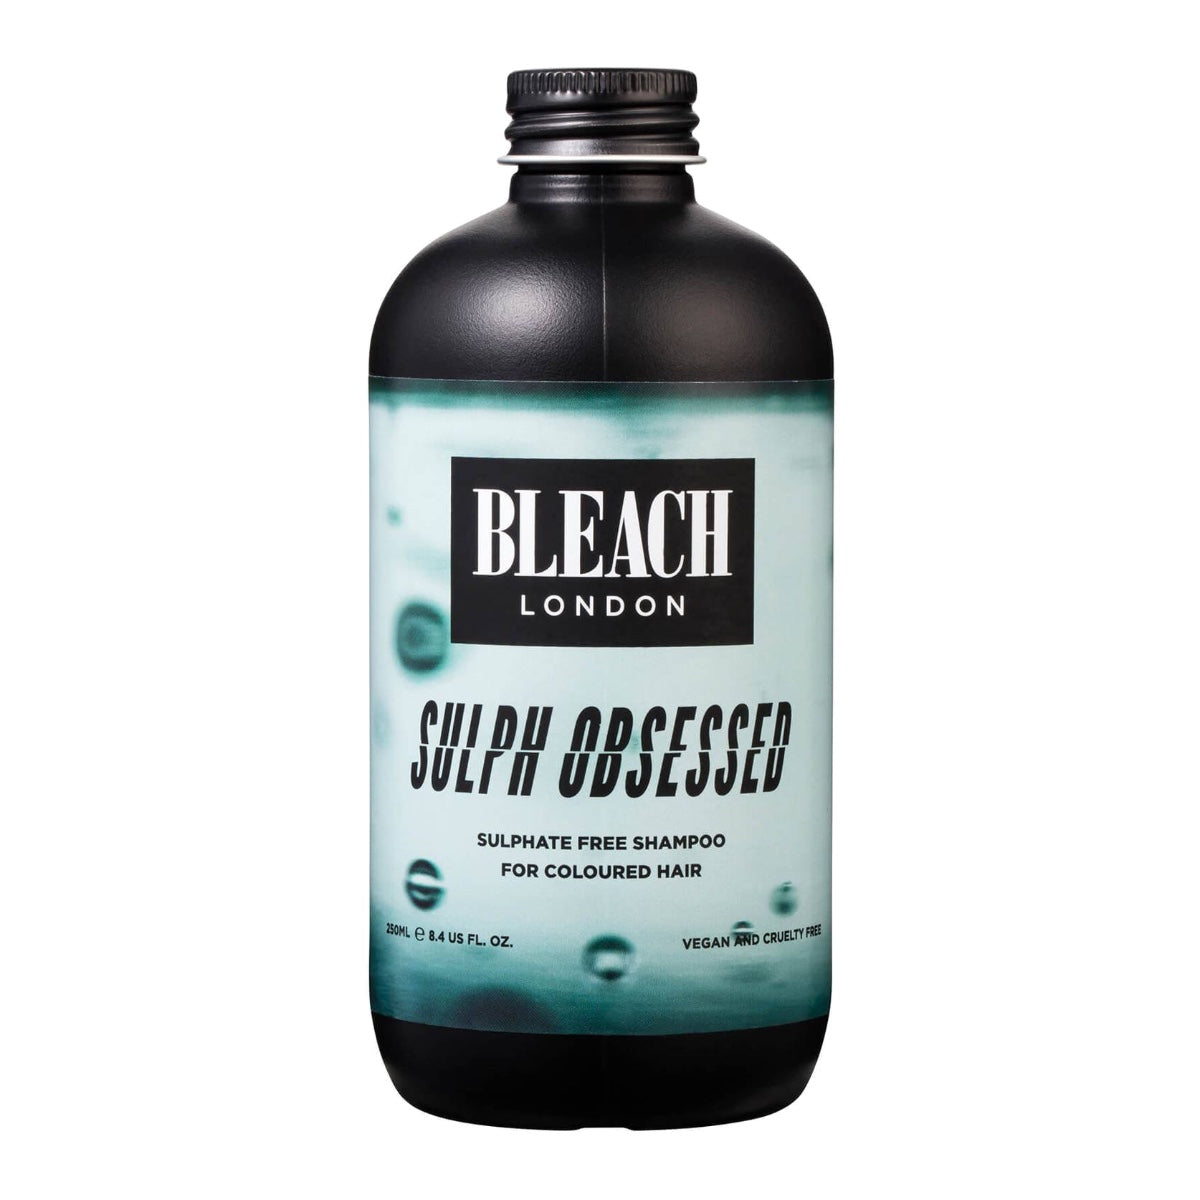 Bleach London Sulph Obsessed Sulphate Free Shampoo